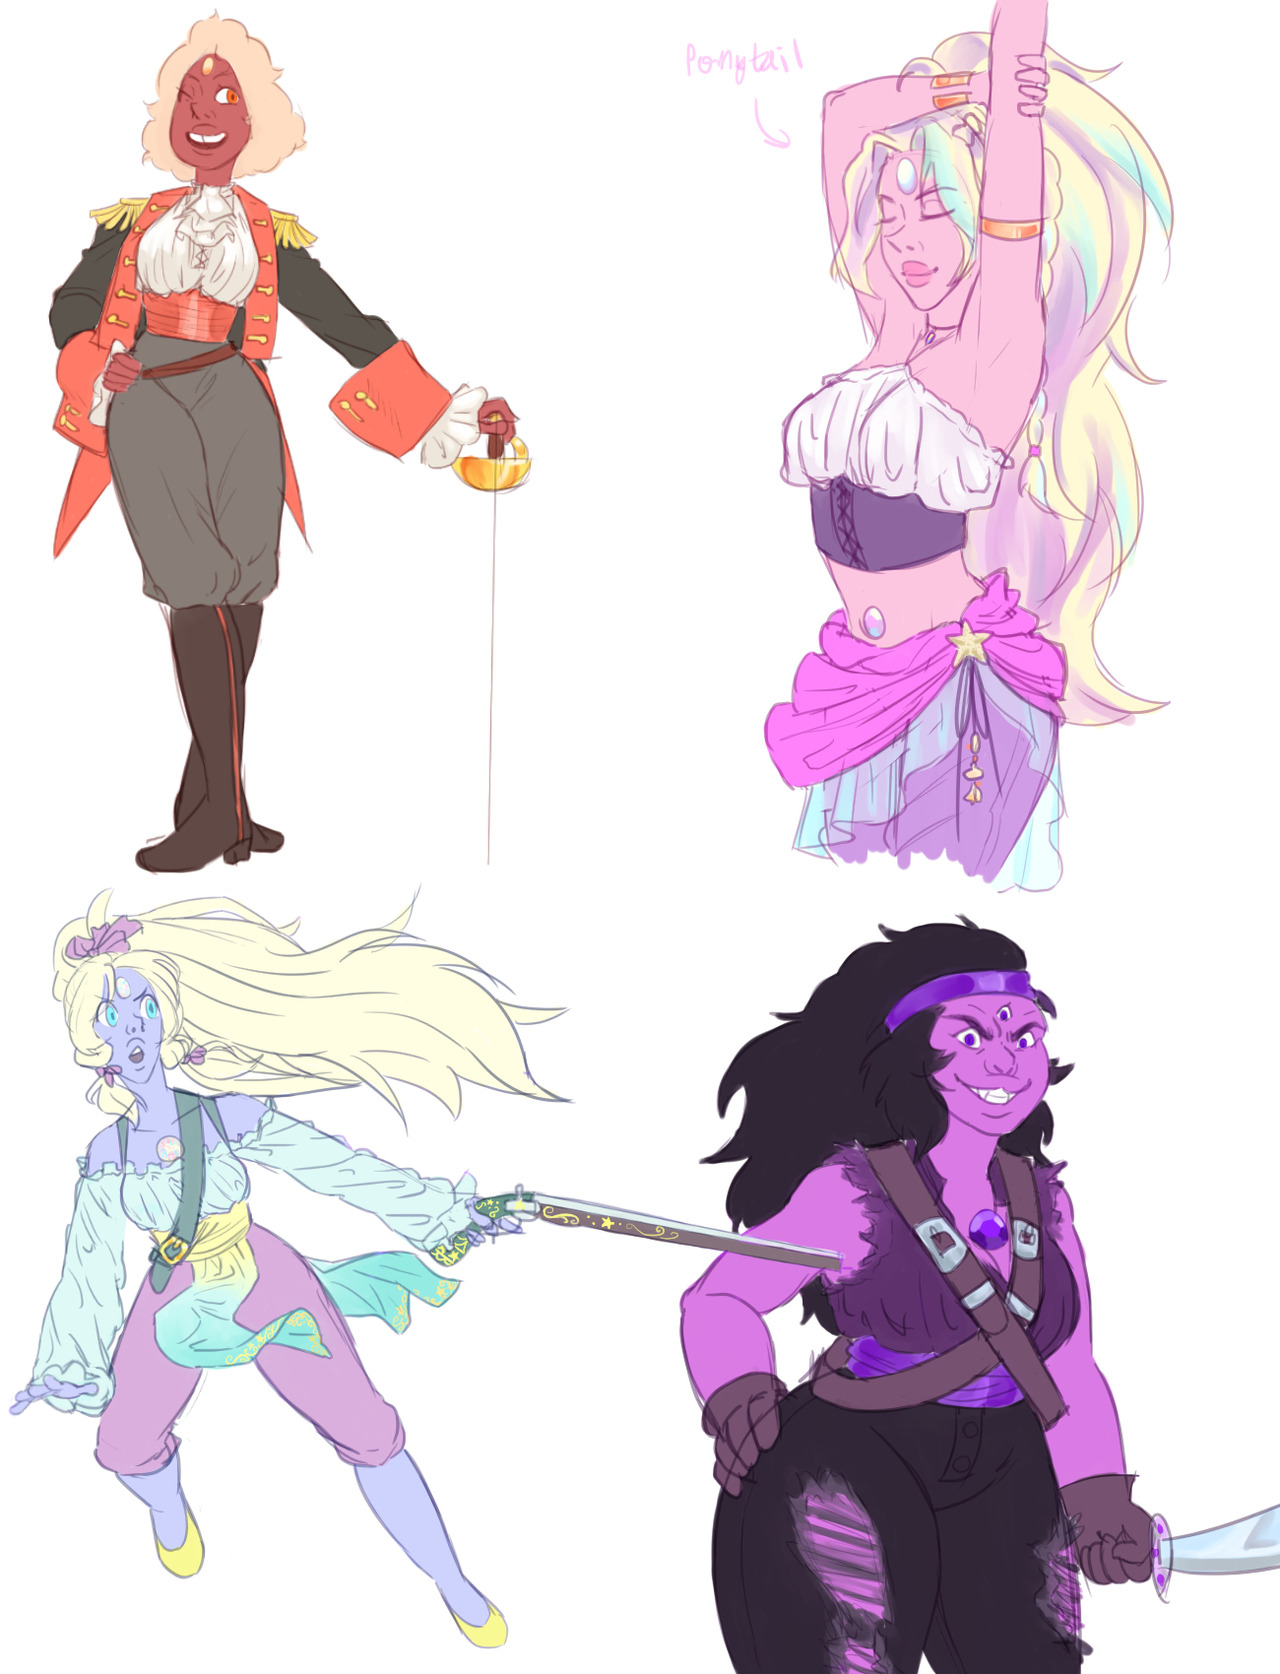 Pirate AU Crystal Gem fusions!! These were So. Much. Fun. Why don’t I draw them more often????? (P.S. please ignore Opal’s wonky right arm lmao